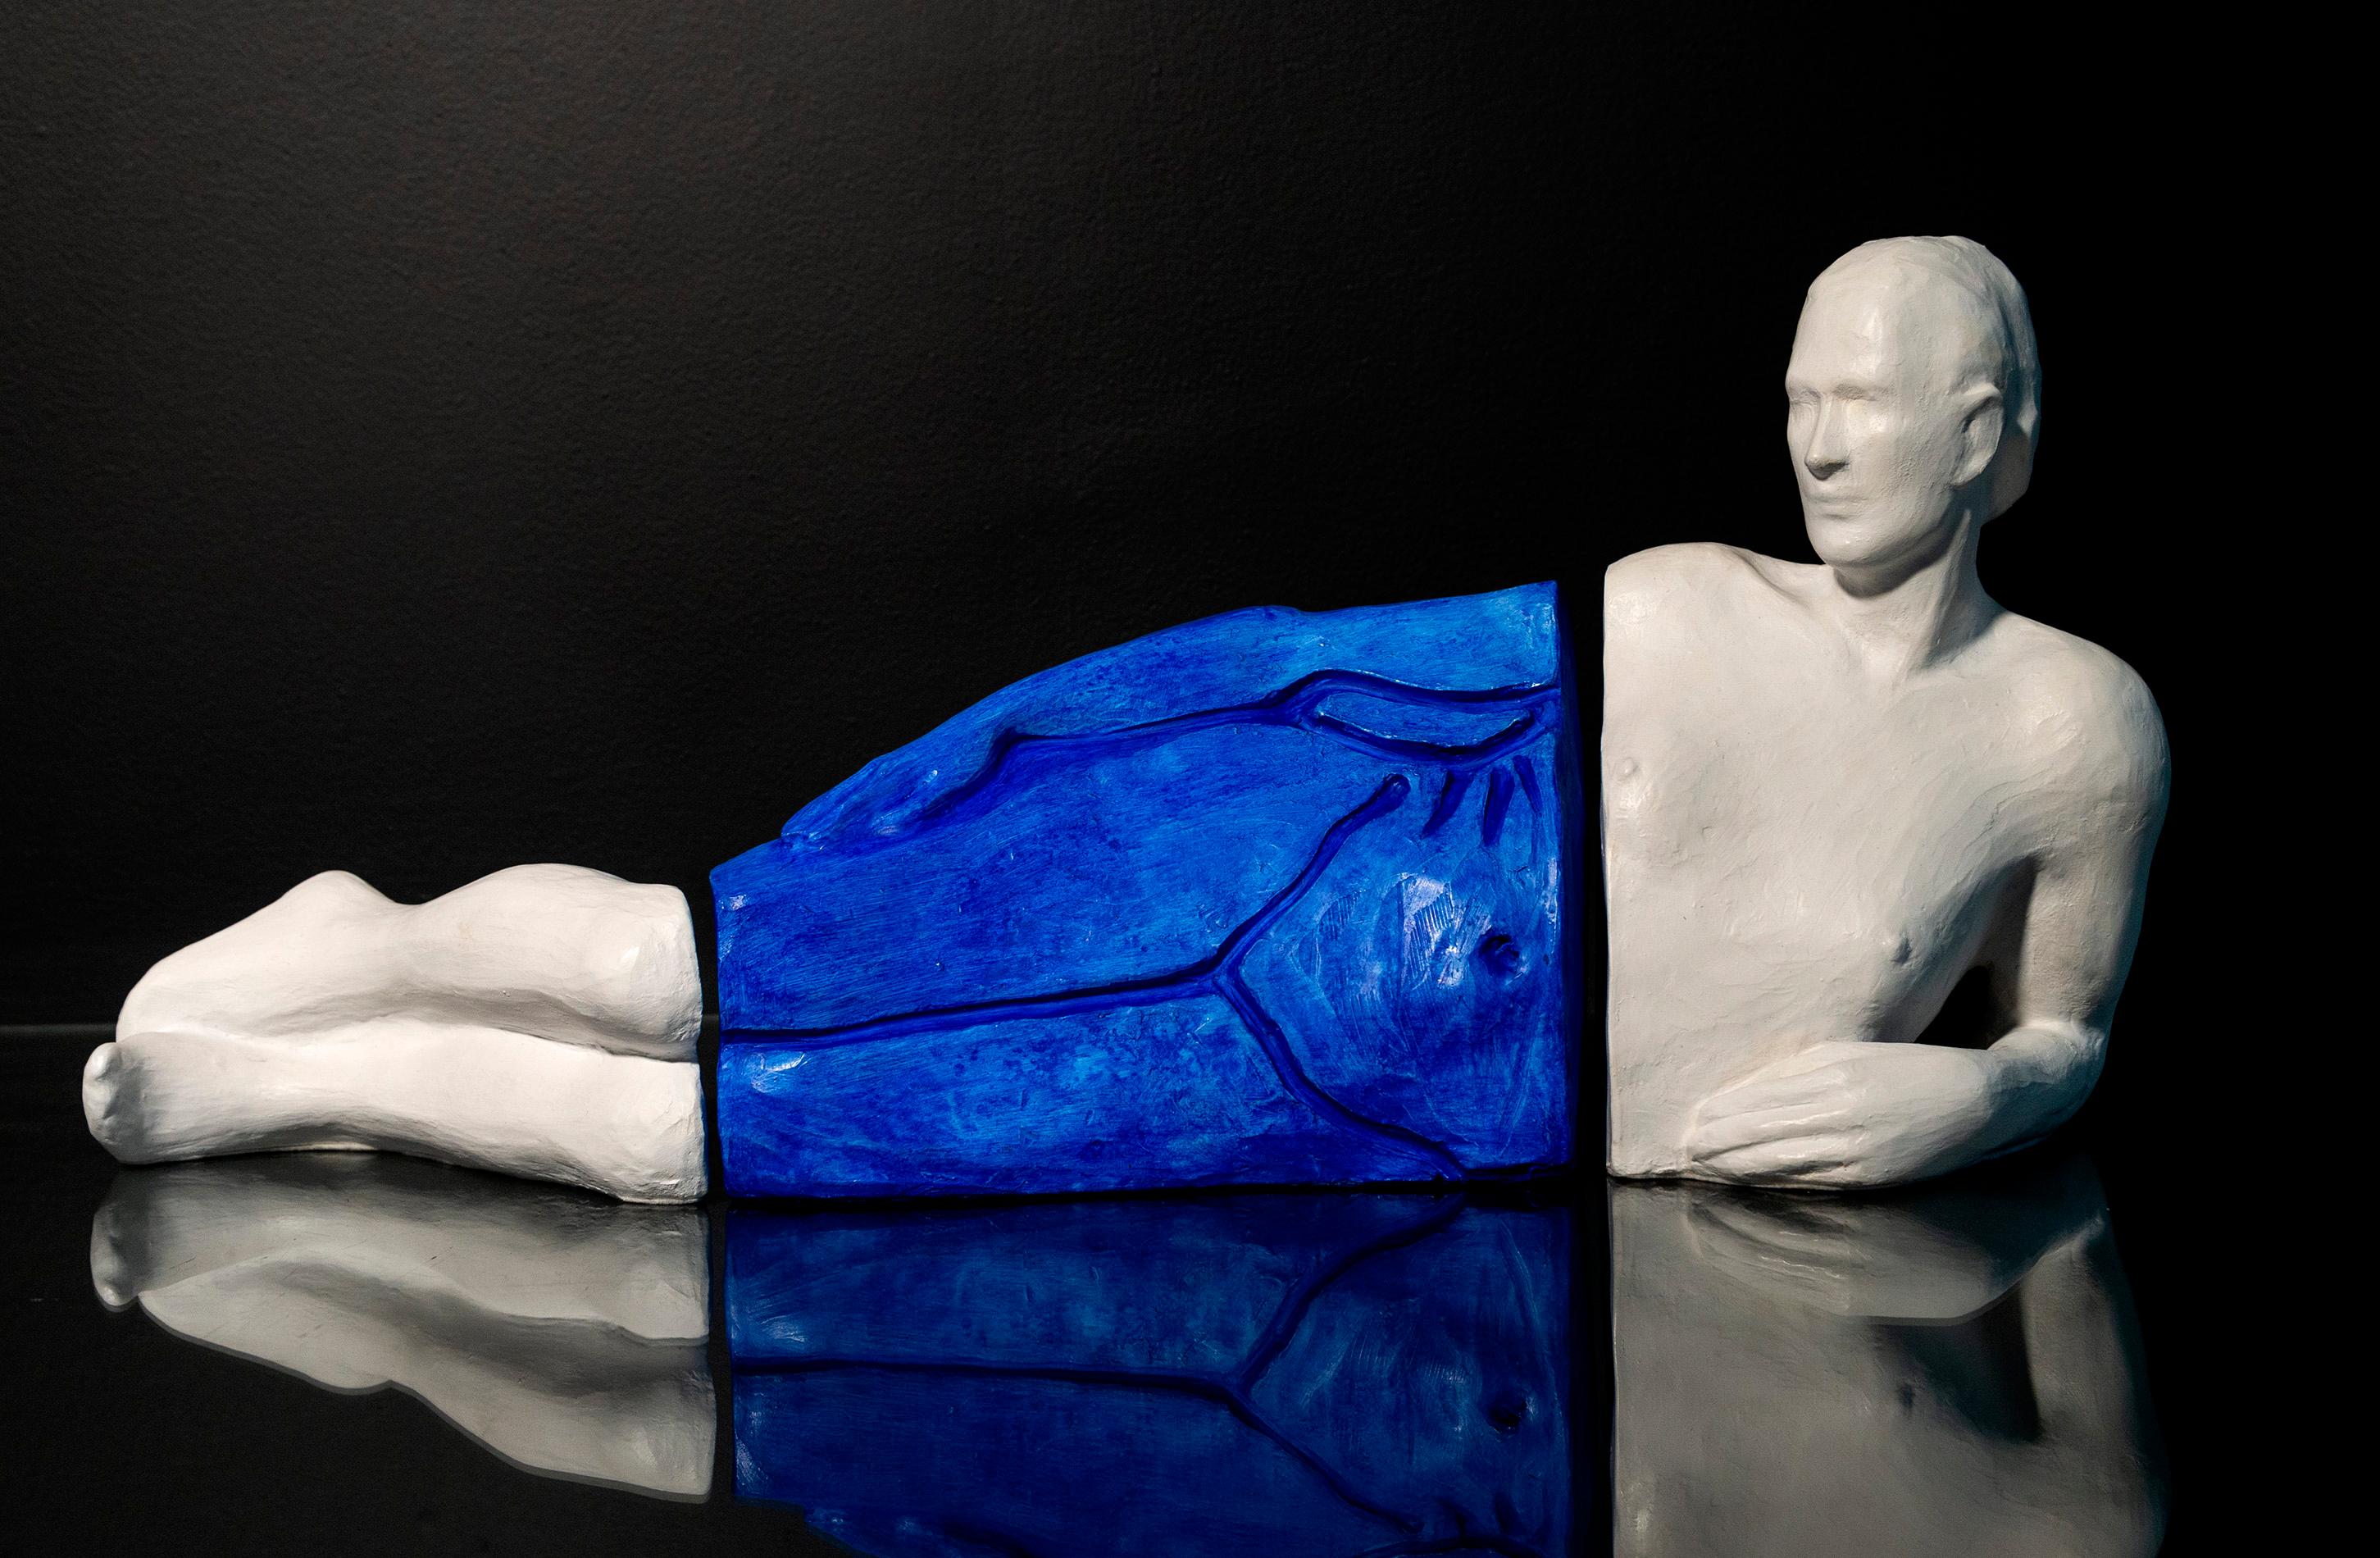 Sculptor Frances Semple has reimagined classic figurative sculpture by playing with form and separating the body into distinct sections. With this tabletop piece, a figure is lying on its side, its head, torso and legs divided. The midsection of the